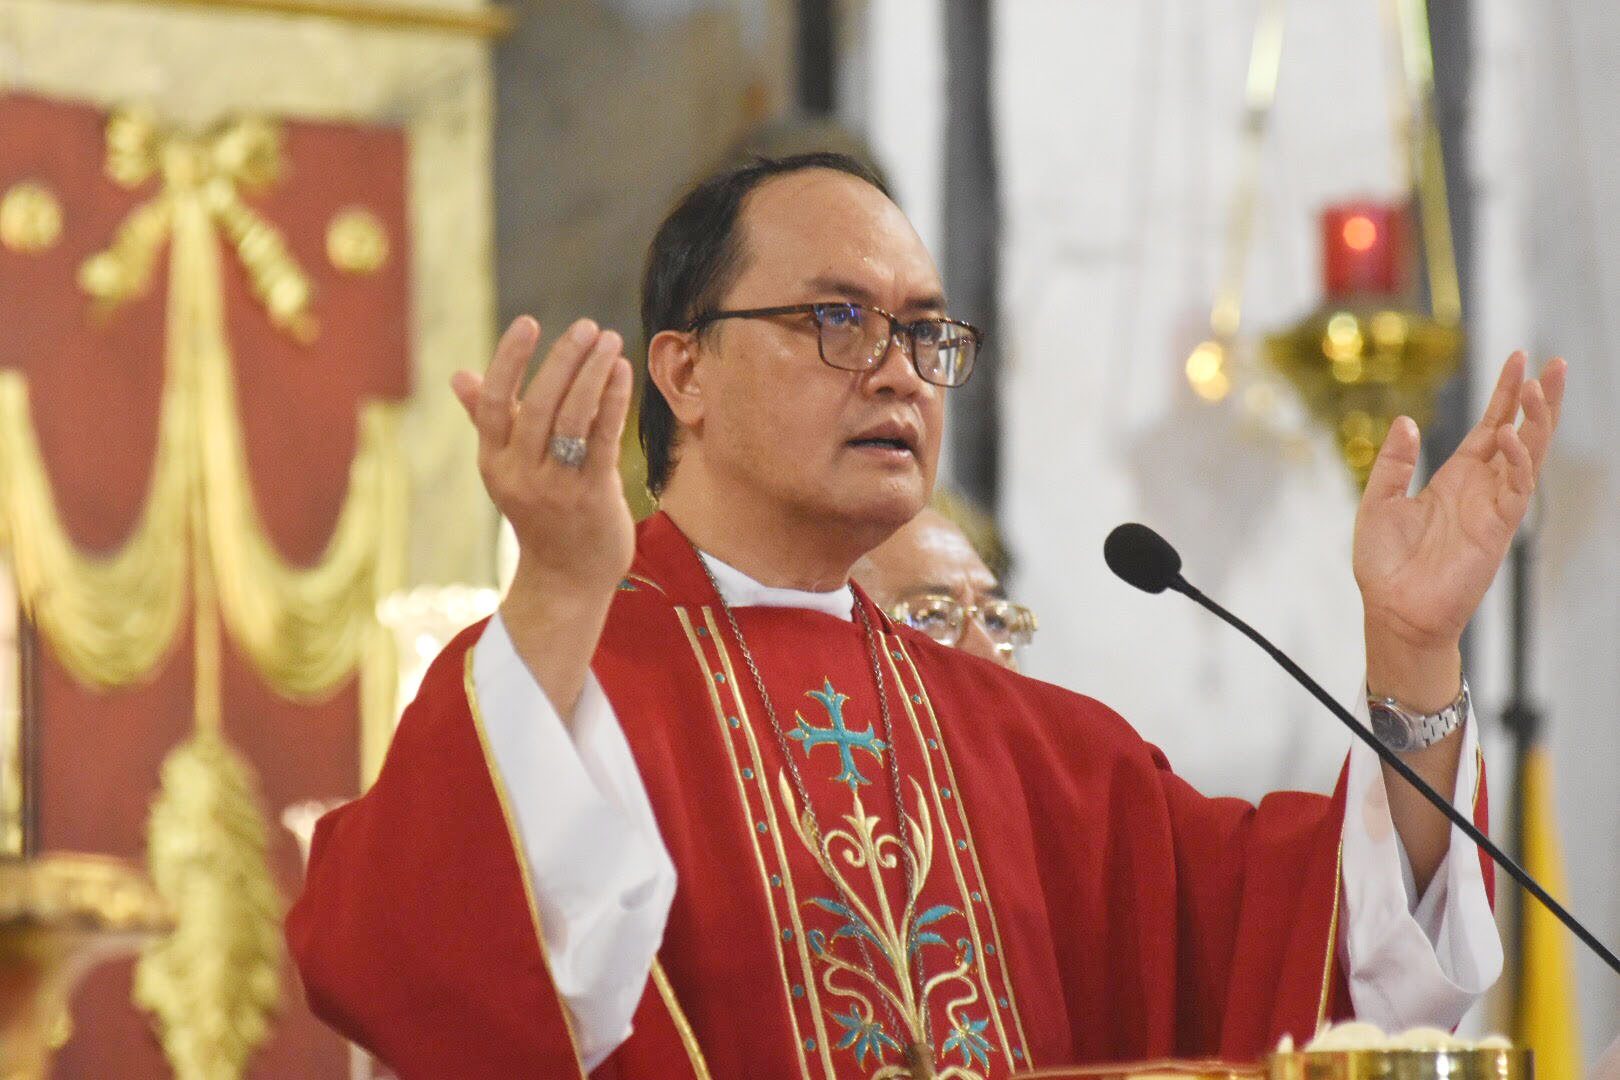 SPEAKING OUT. Despite death threats, Caloocan Bishop Pablo Virgilio David vows to continue speaking out against abuses. Photo by Angie de Silva/Rappler  